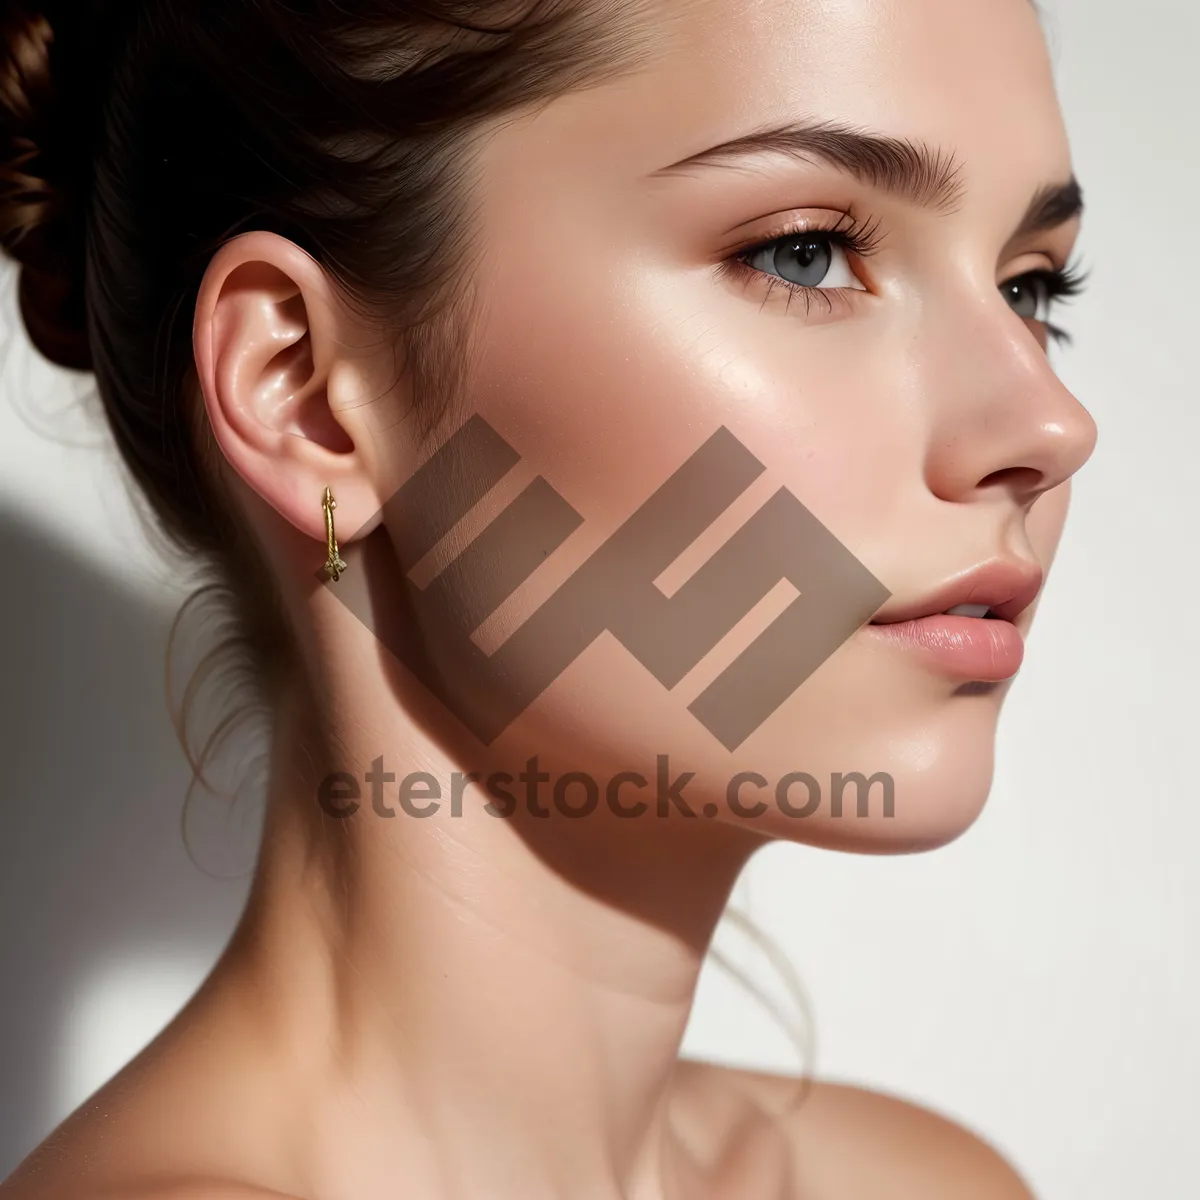 Picture of Radiant Sensuality: Clean and Attractive Skincare Portrait